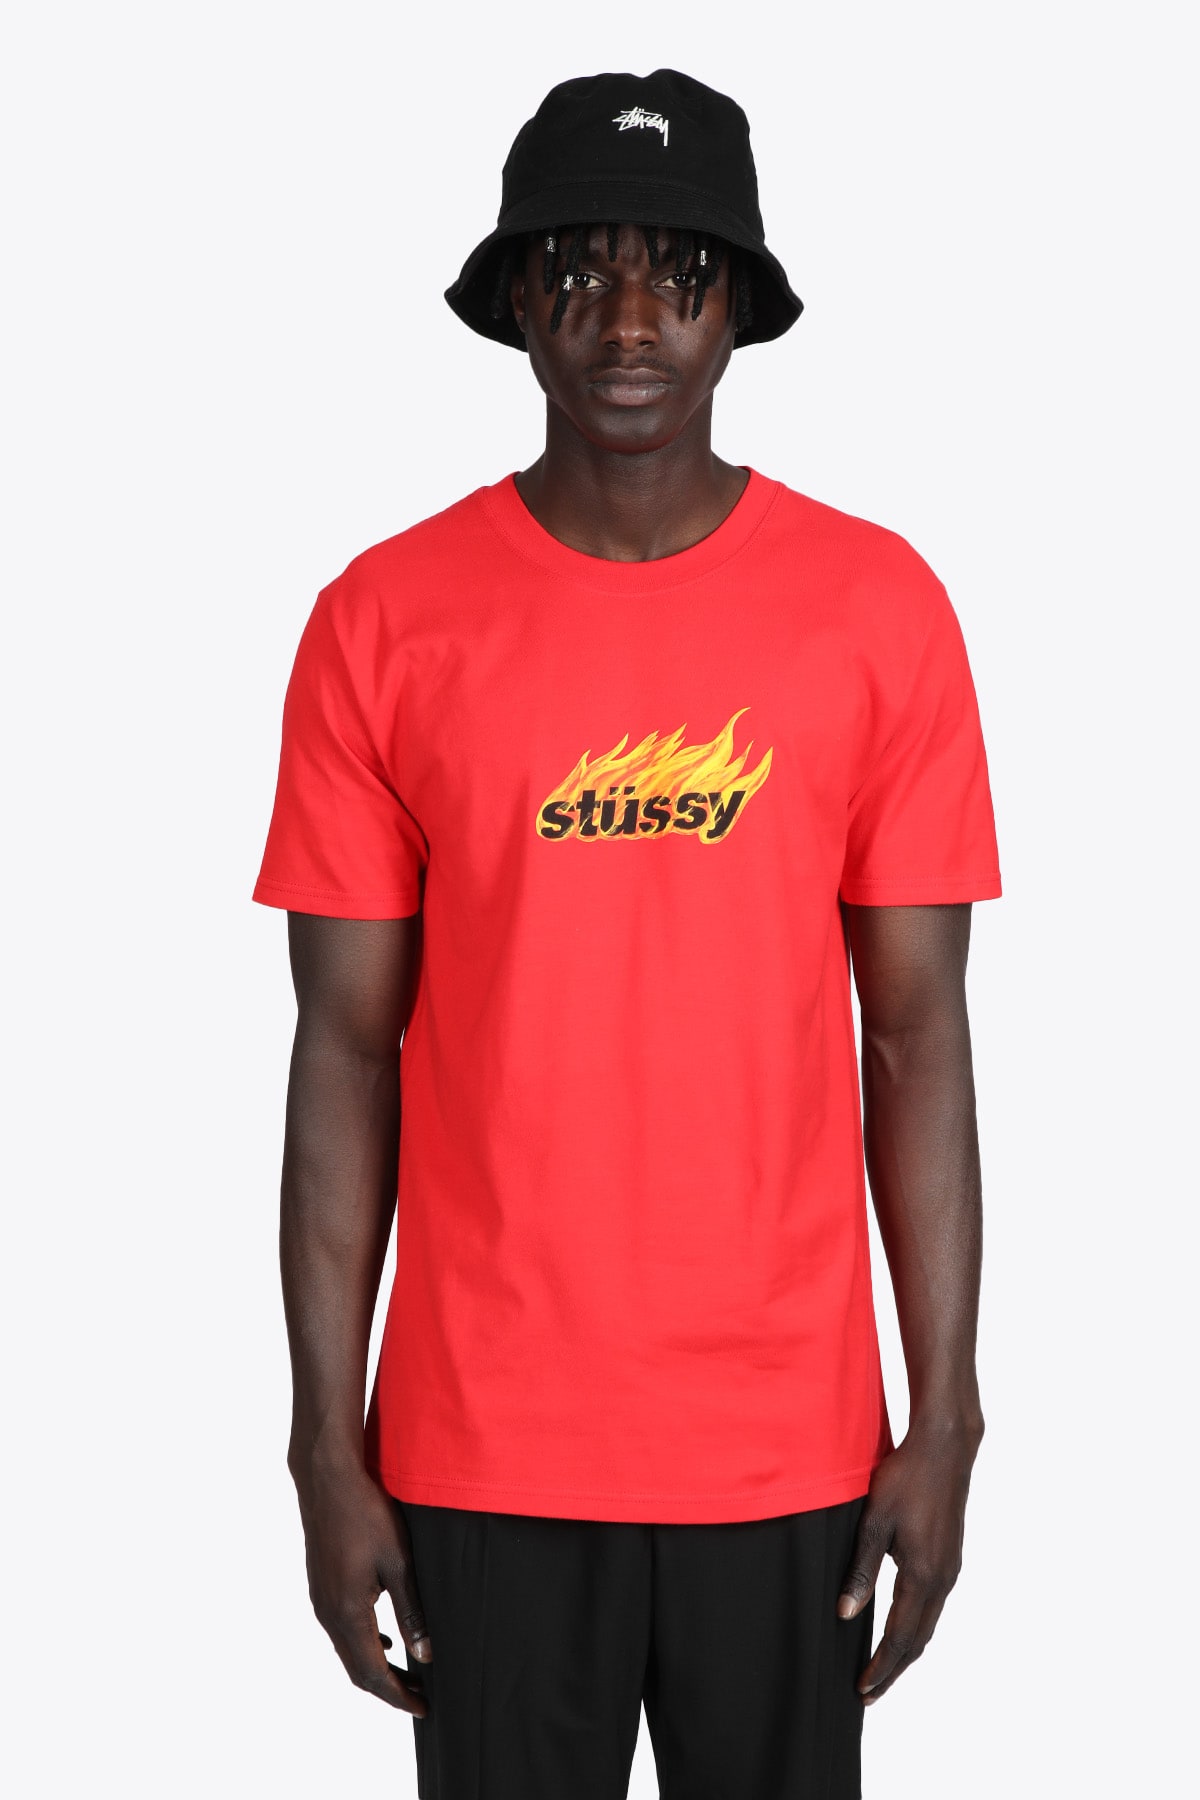 Stussy Flames Tee Red cotton t-shirt with flames logo - Flames tee